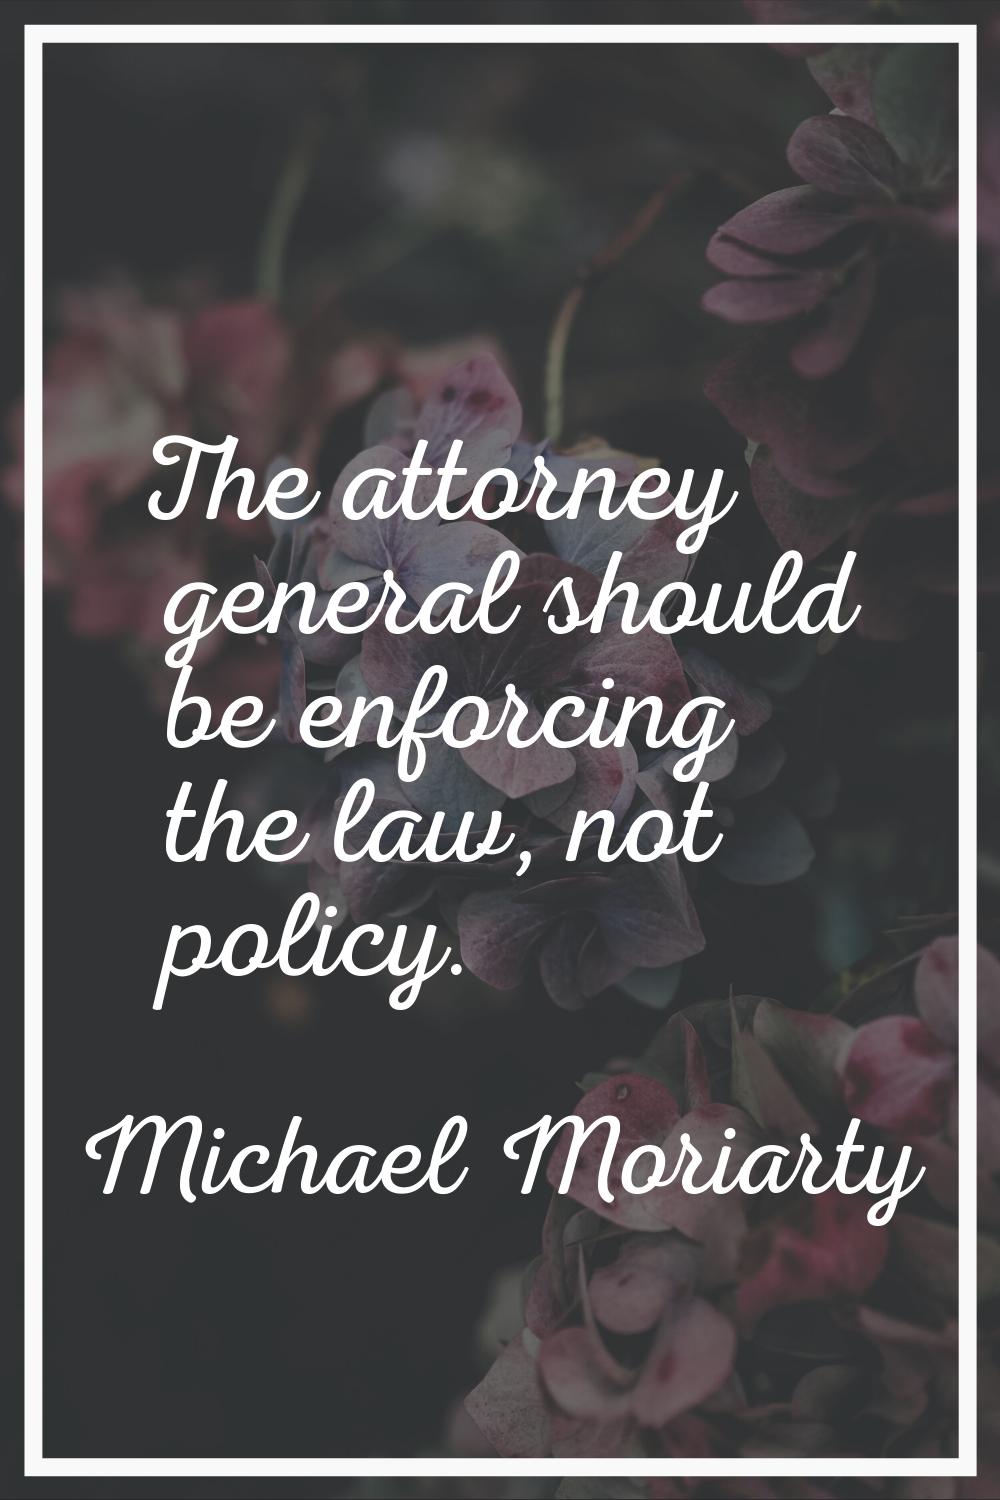 The attorney general should be enforcing the law, not policy.